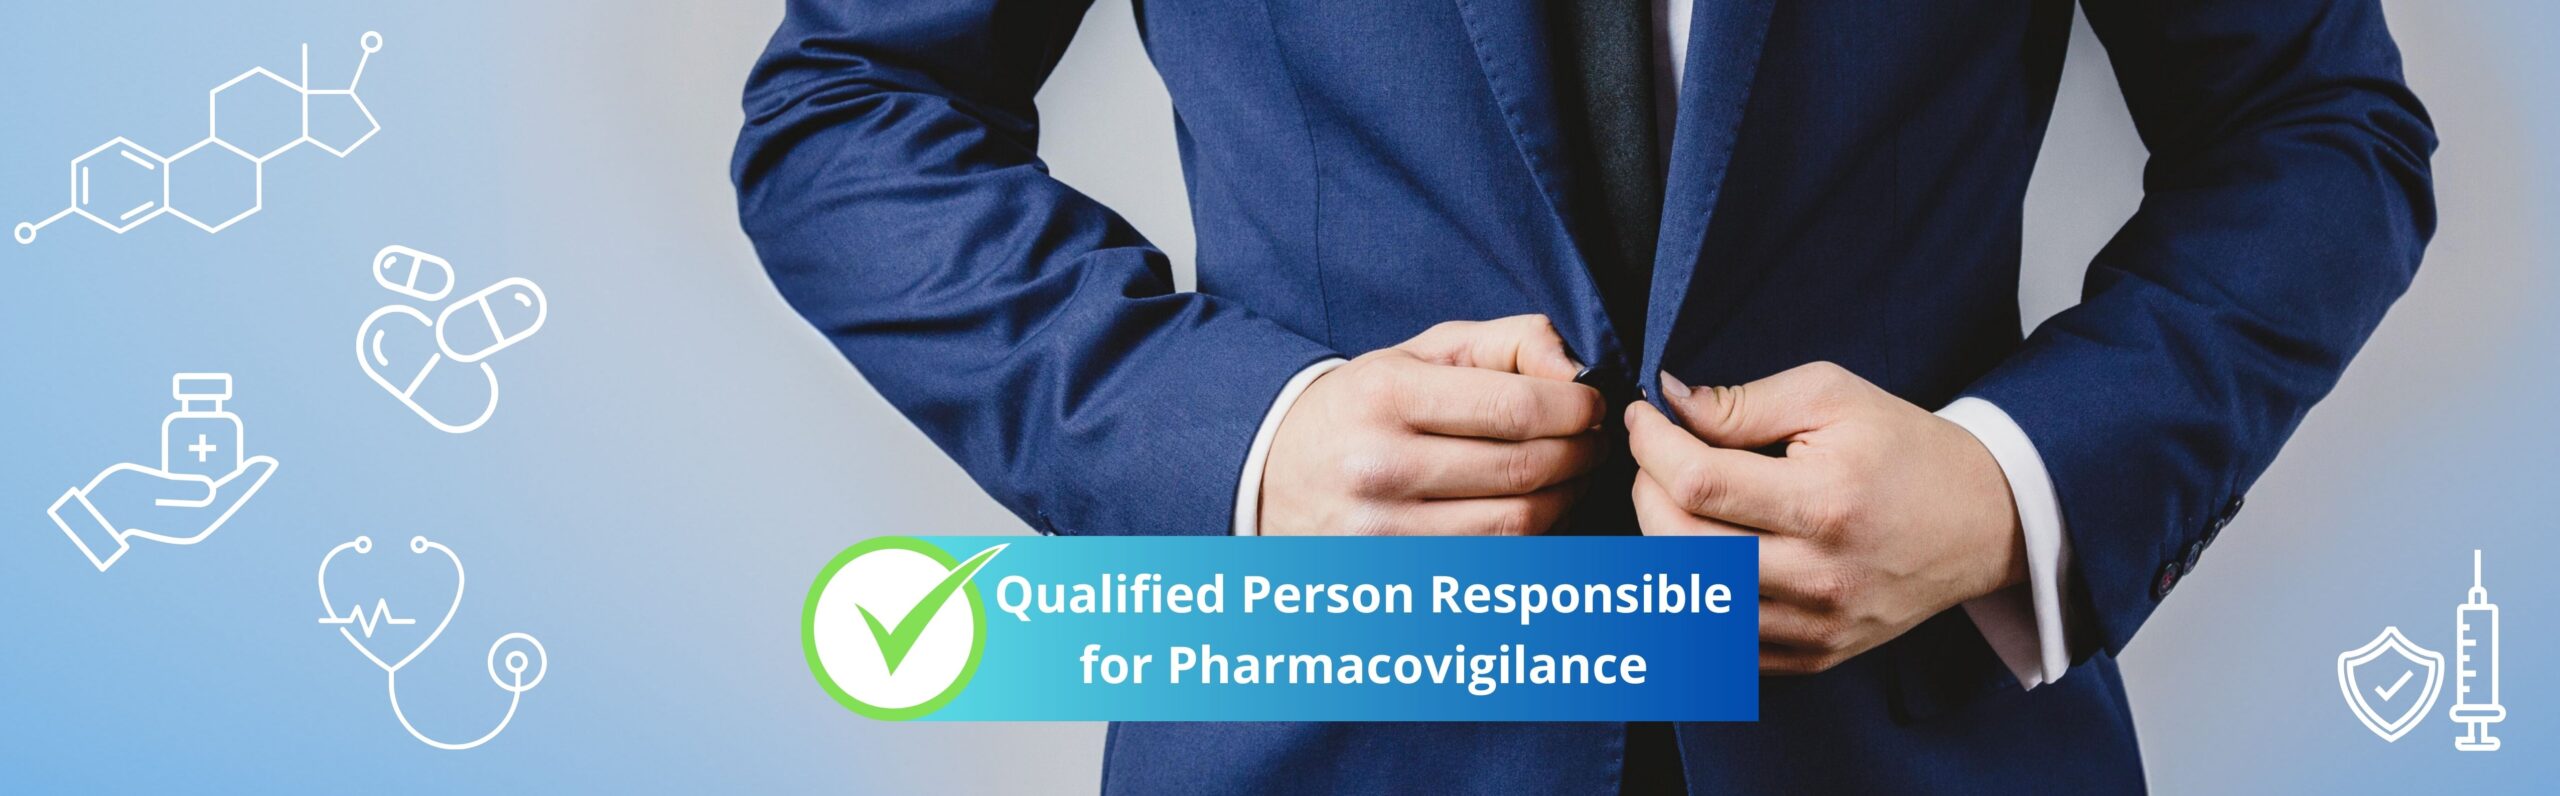 A man is wearing a business suit. He is Qualified Person Responsible for Pharmacovigilance. In the background you can see a lot of elements related to the pharmaceutical industry such as pills, chemical formula, syringe, medicinal products.